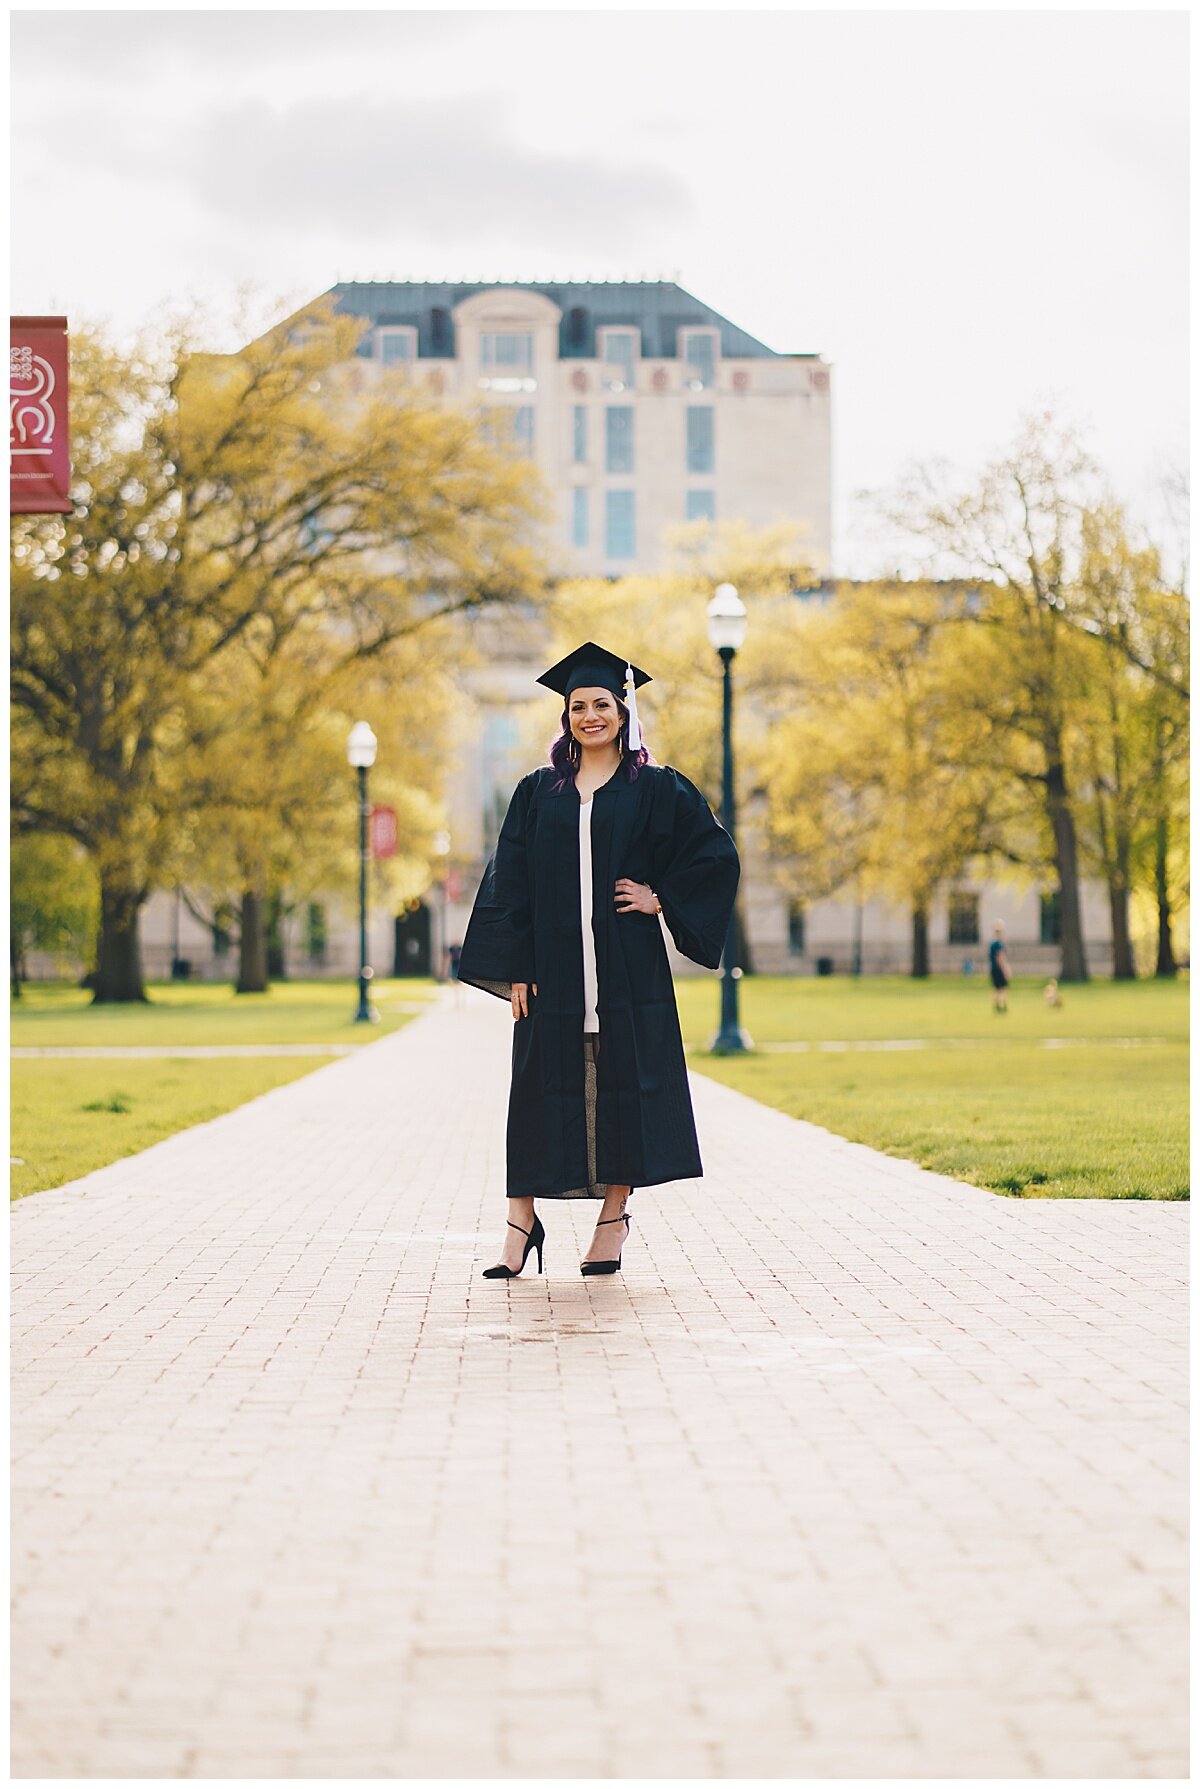 Leah’s College Graduation Photoshoot at The Ohio State University ...